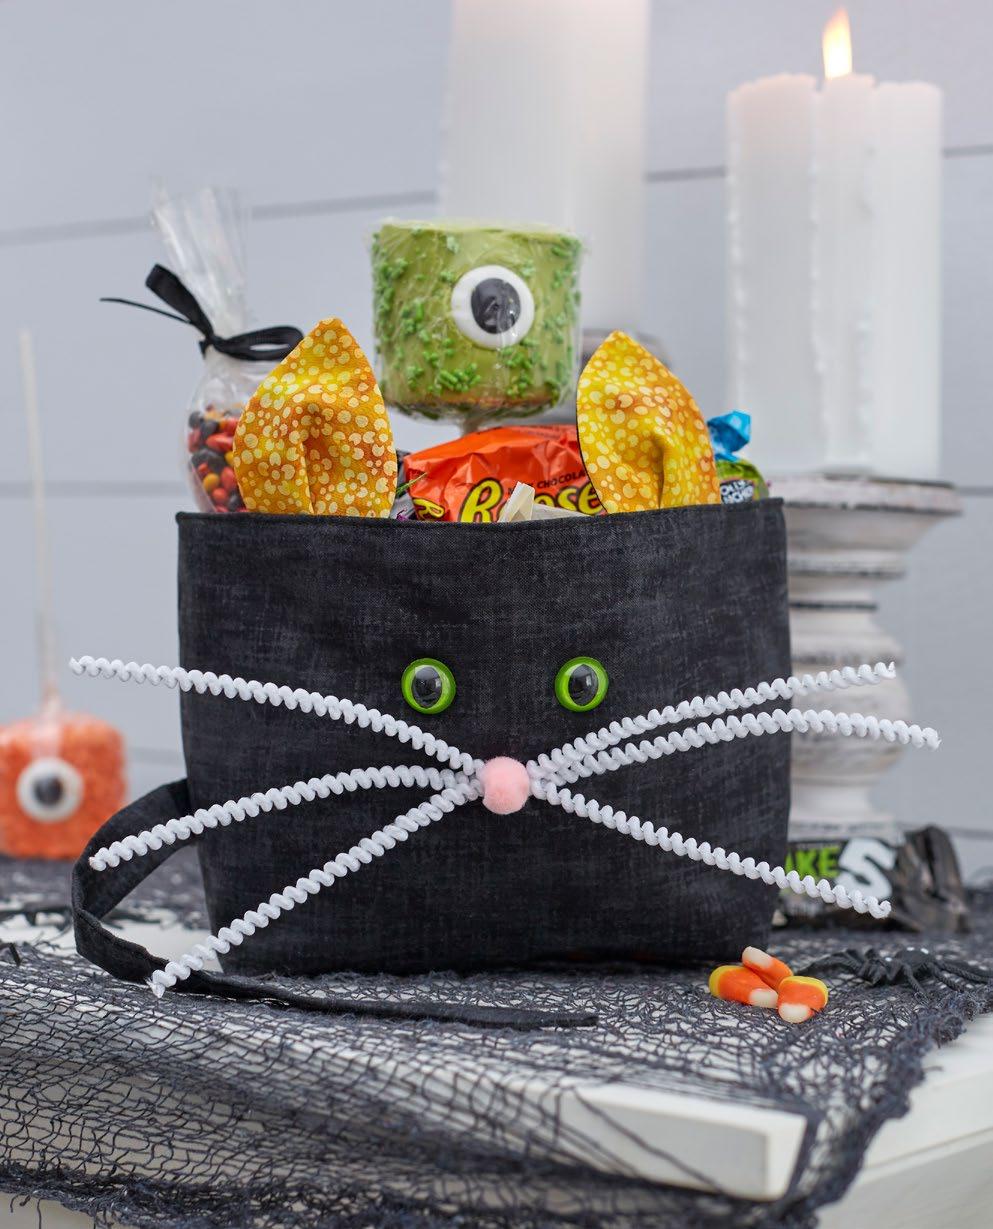 Halloween Black Cat Basket Technique: Designed By: Skill Level: Crafting Time: Finished size: Sewing, Fabric Crafting Linda Turner Griepentrog Intermediate An evening 6" (15.